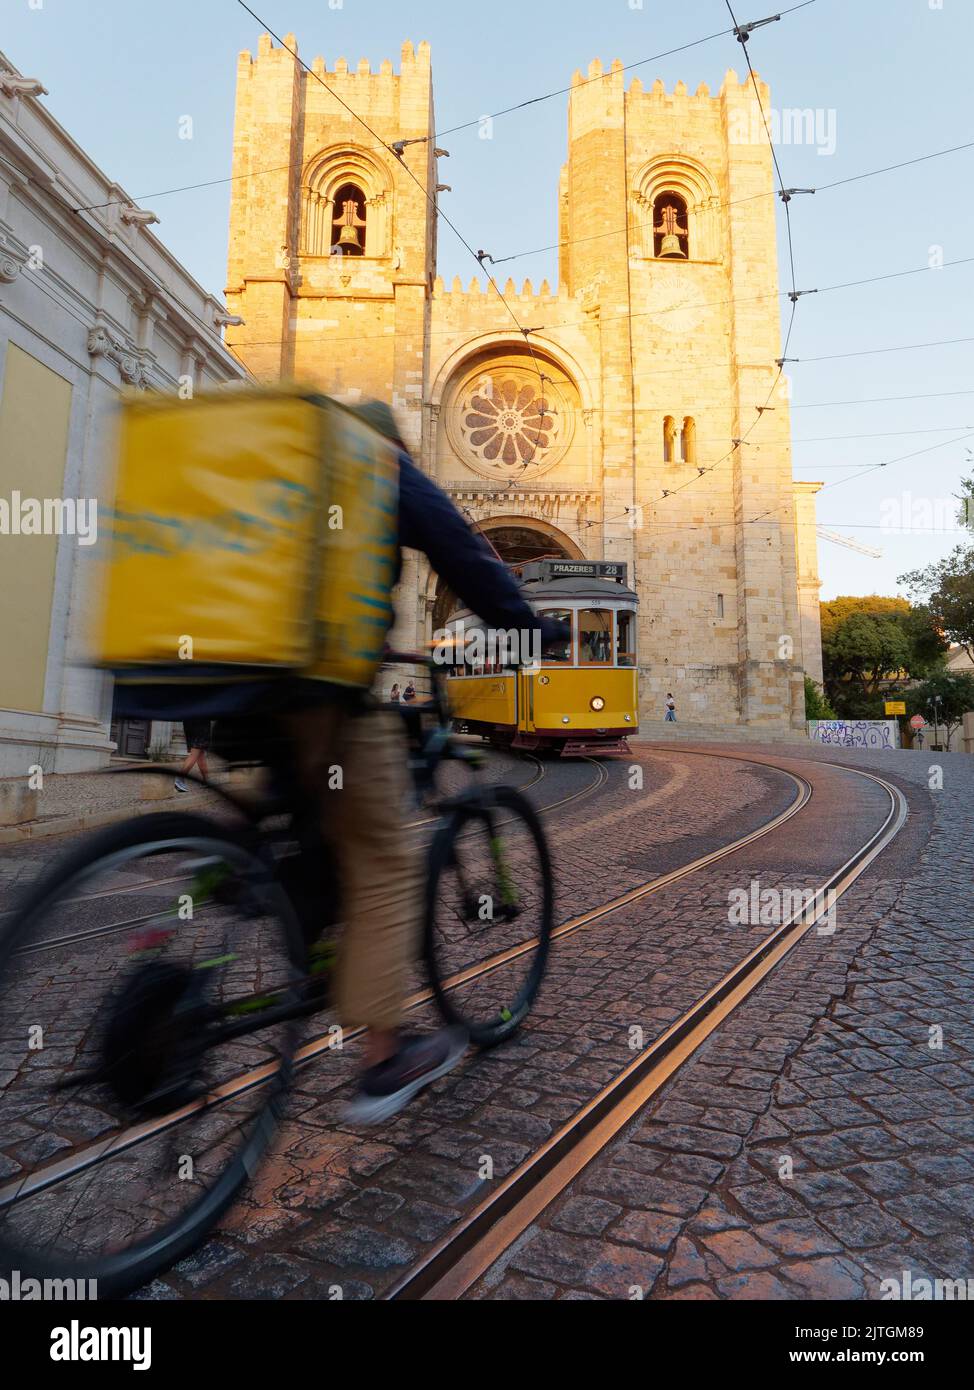 The Cathedral of Saint Mary Major aka Lisbon Cathedral (Sé de Lisboa). Tram and a delivery cyclist with a yellow bag in front. Summers evening. Stock Photo